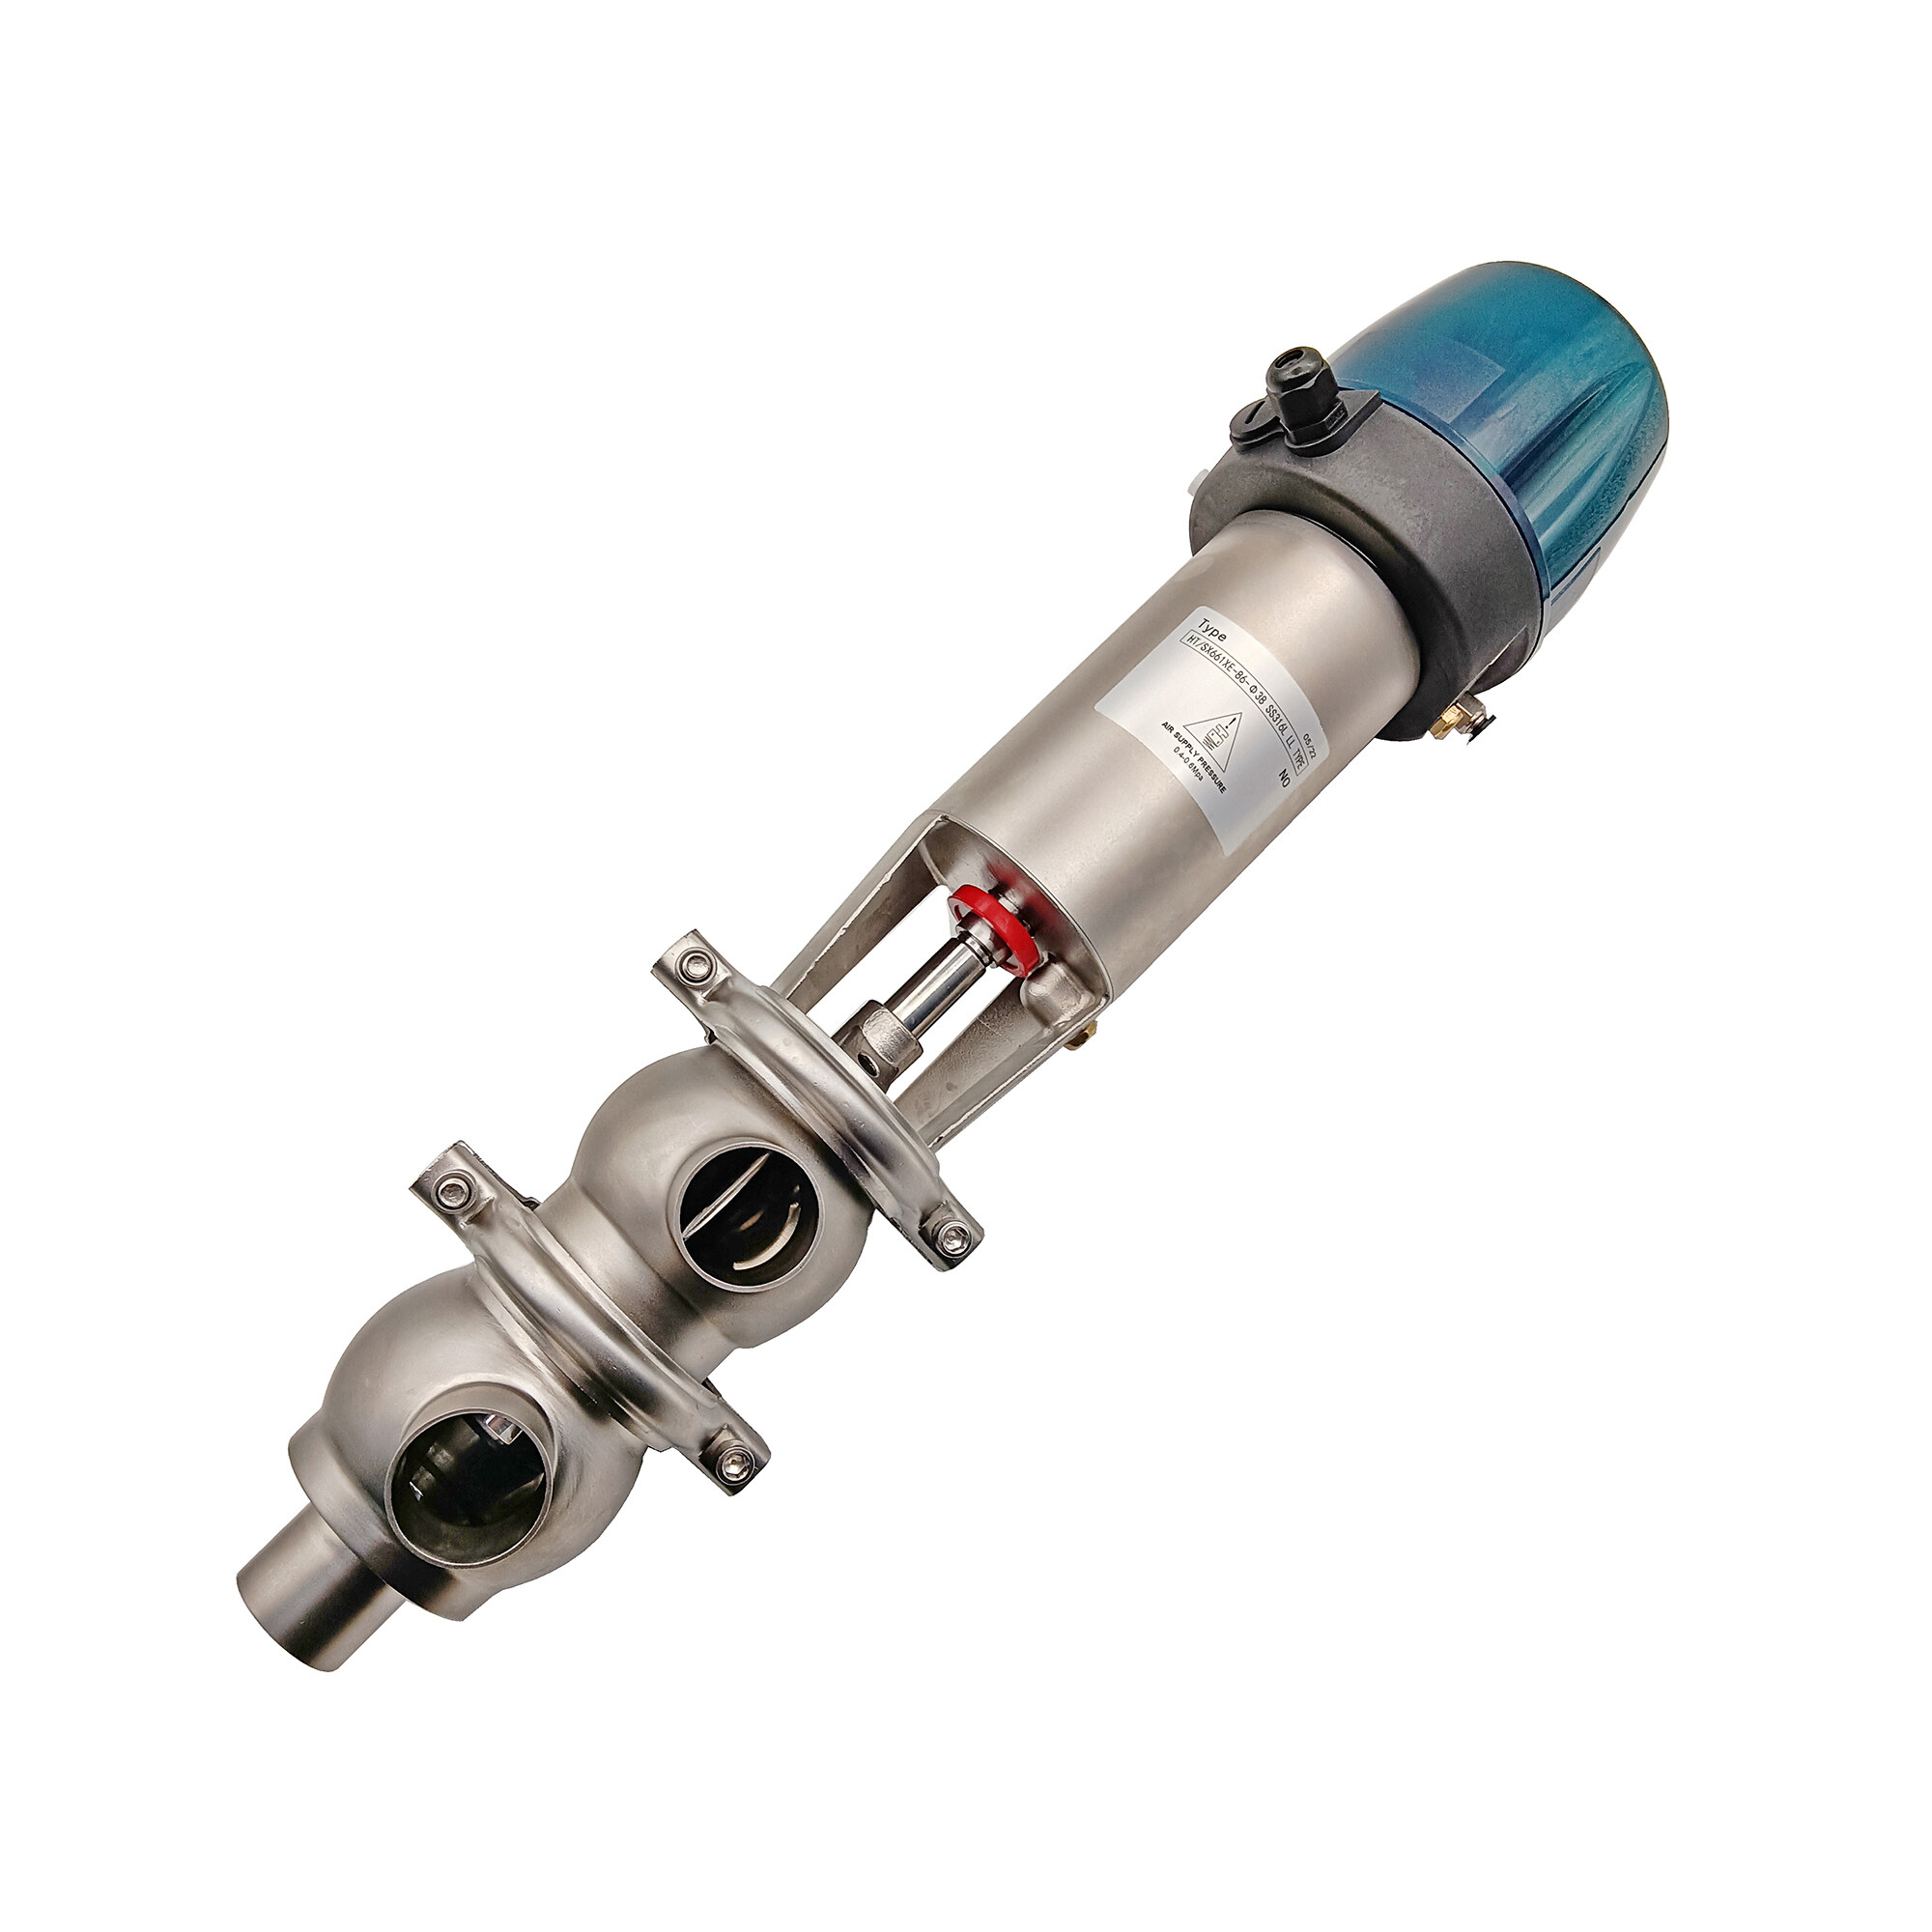 Stainless Steel 21 Model LL Type 3-way Sanitary Flow Division Valve with 24V Control Head